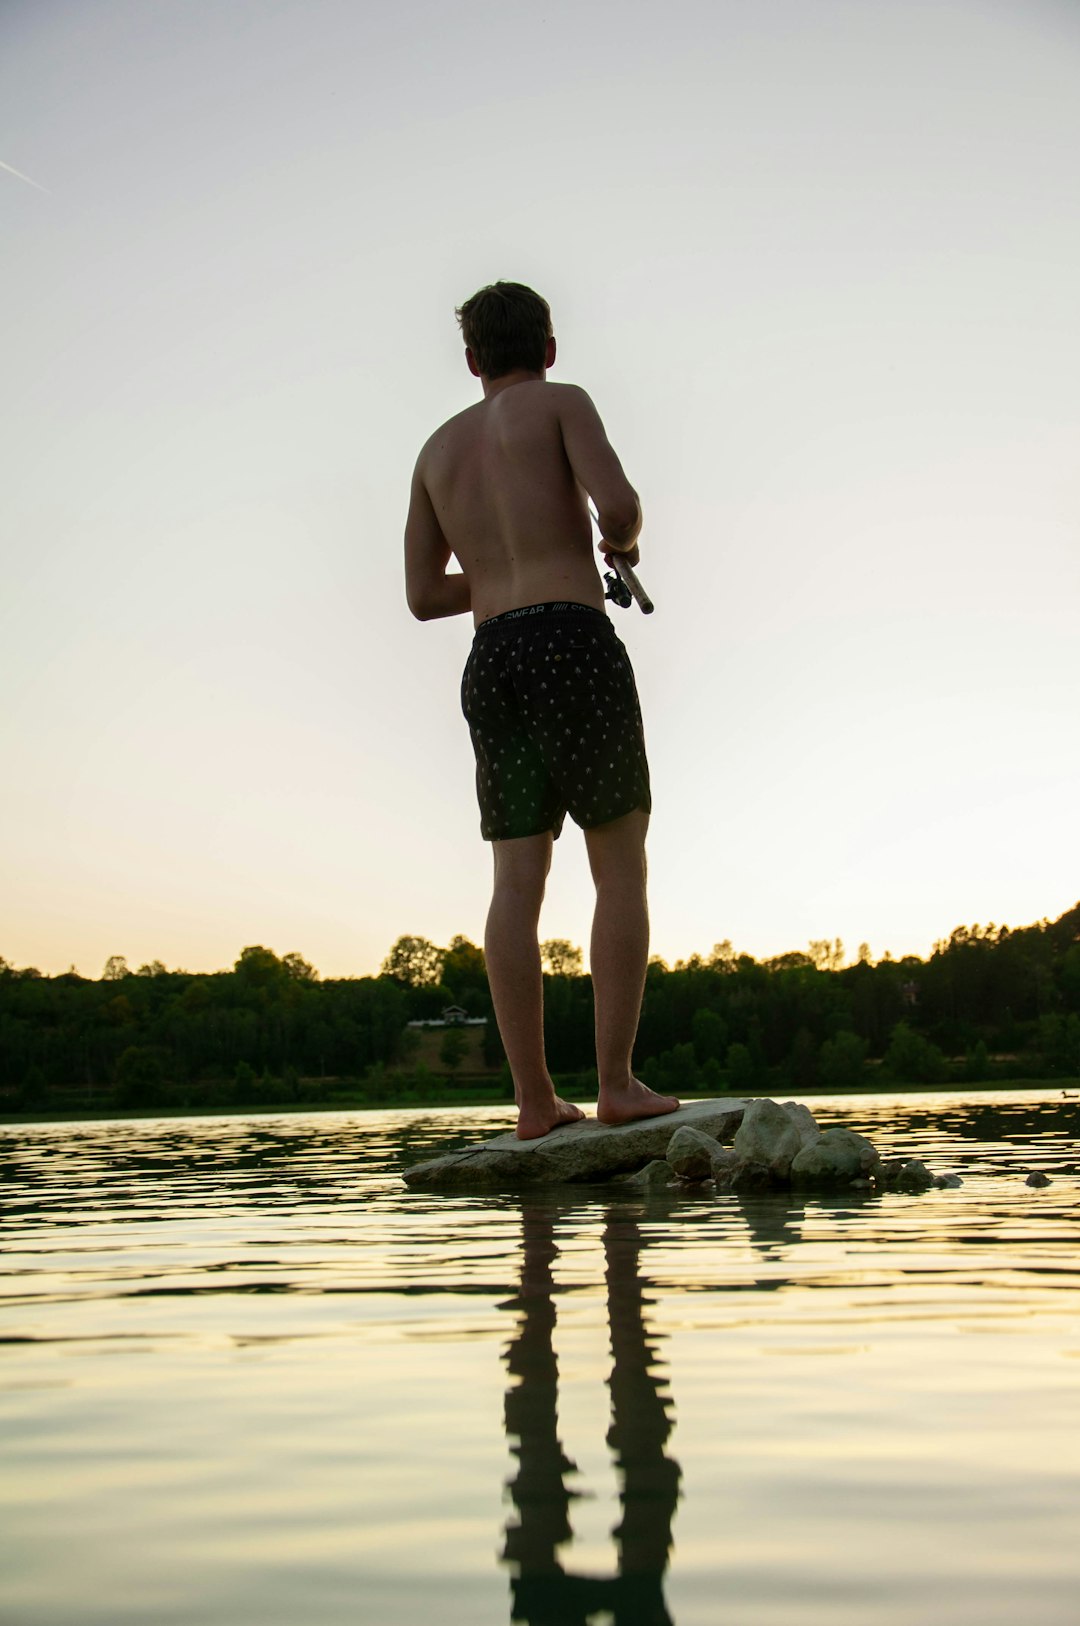 man in black and green floral shorts standing on body of water during daytime